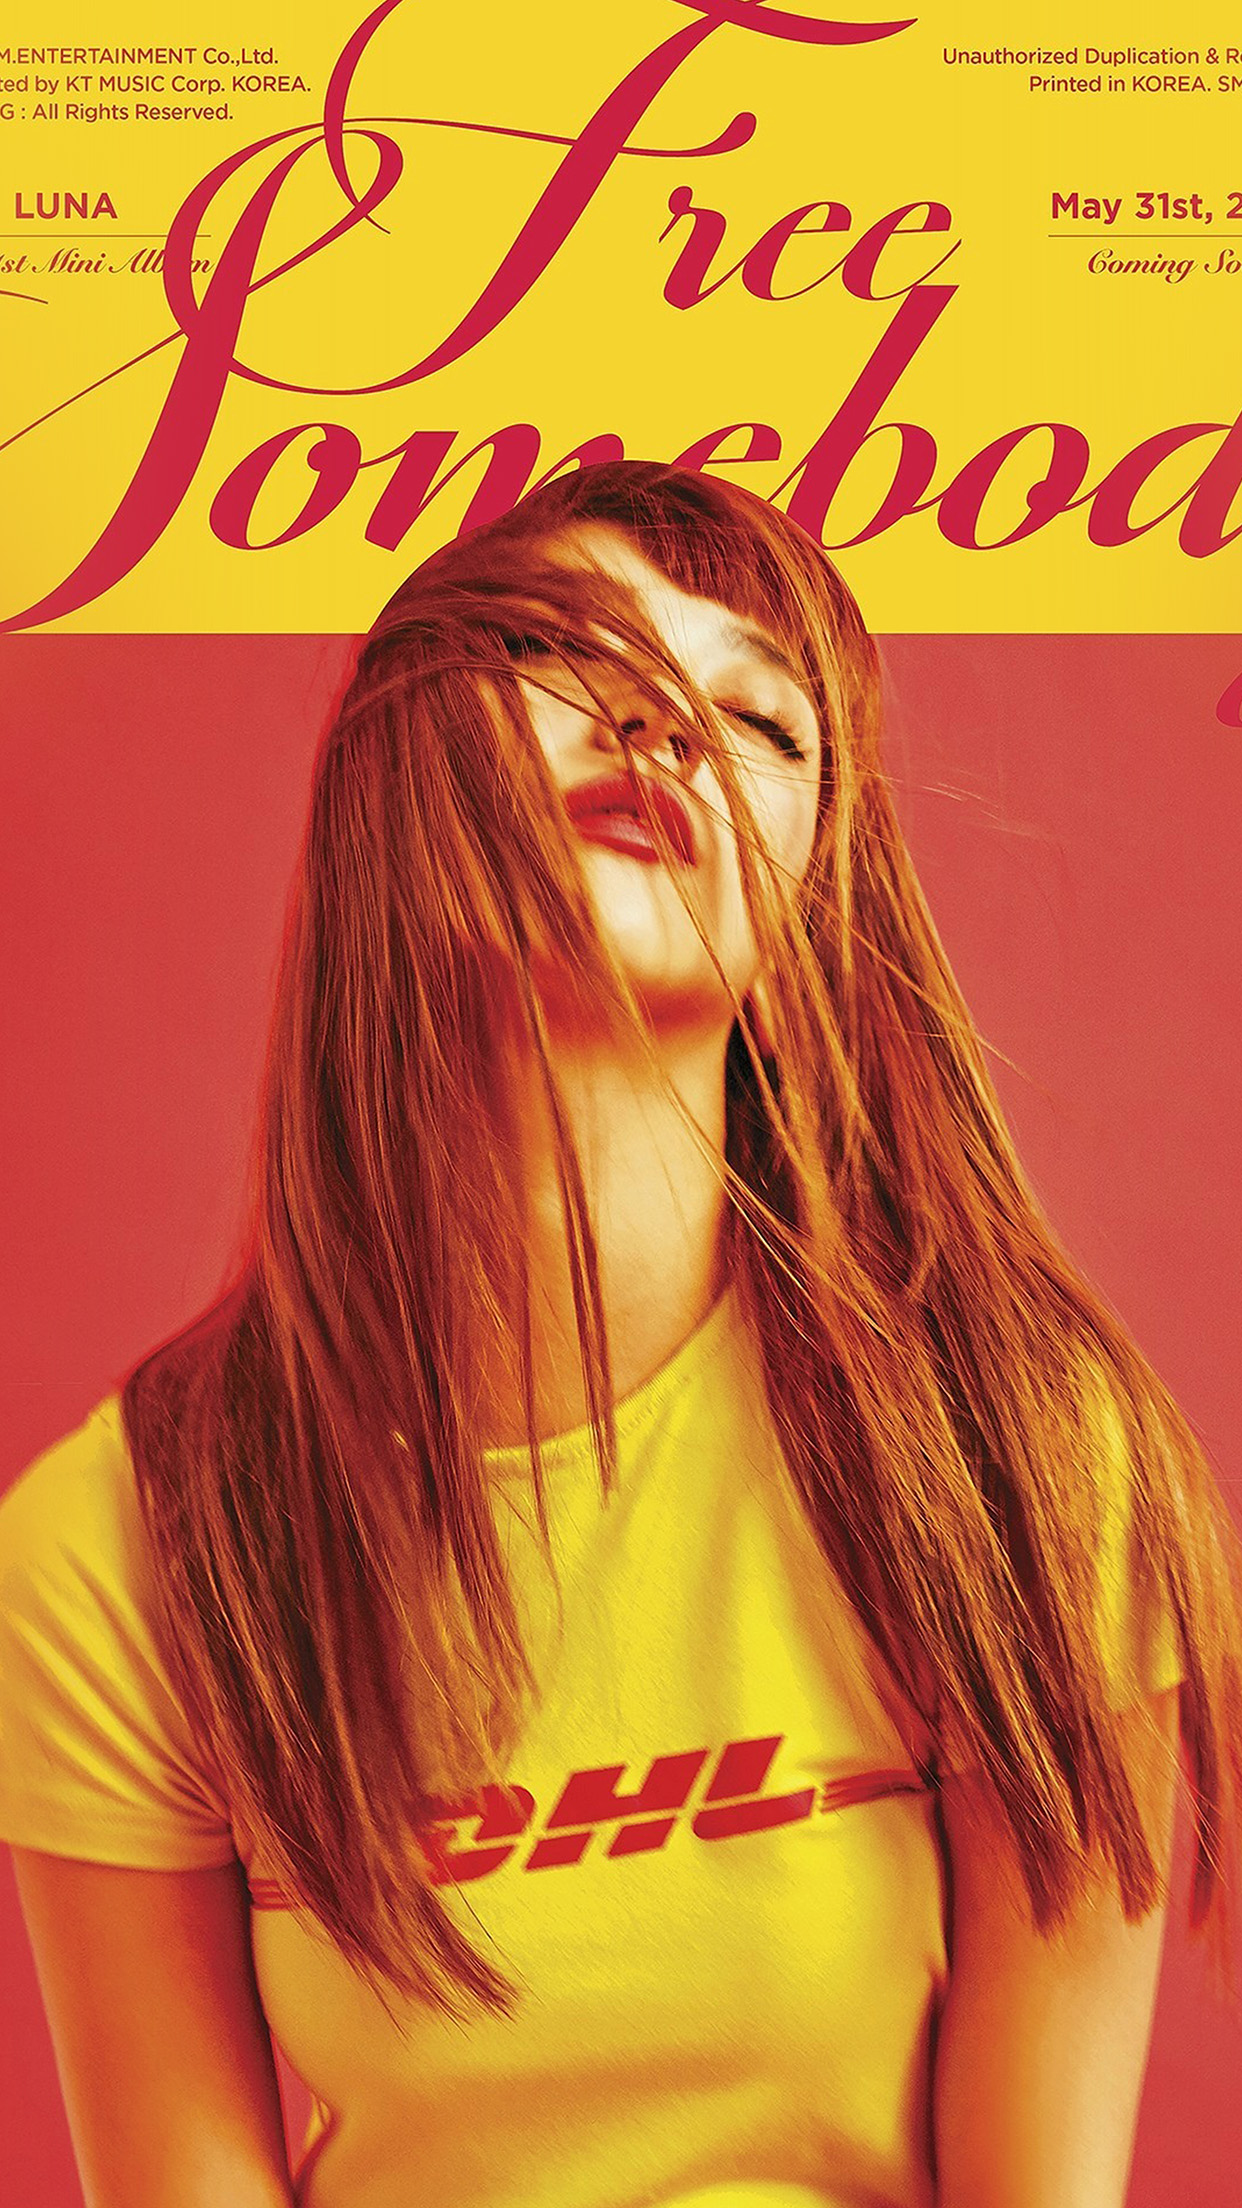 Luna Album Cover Kpop Art Red Yellow Girl Android wallpaper